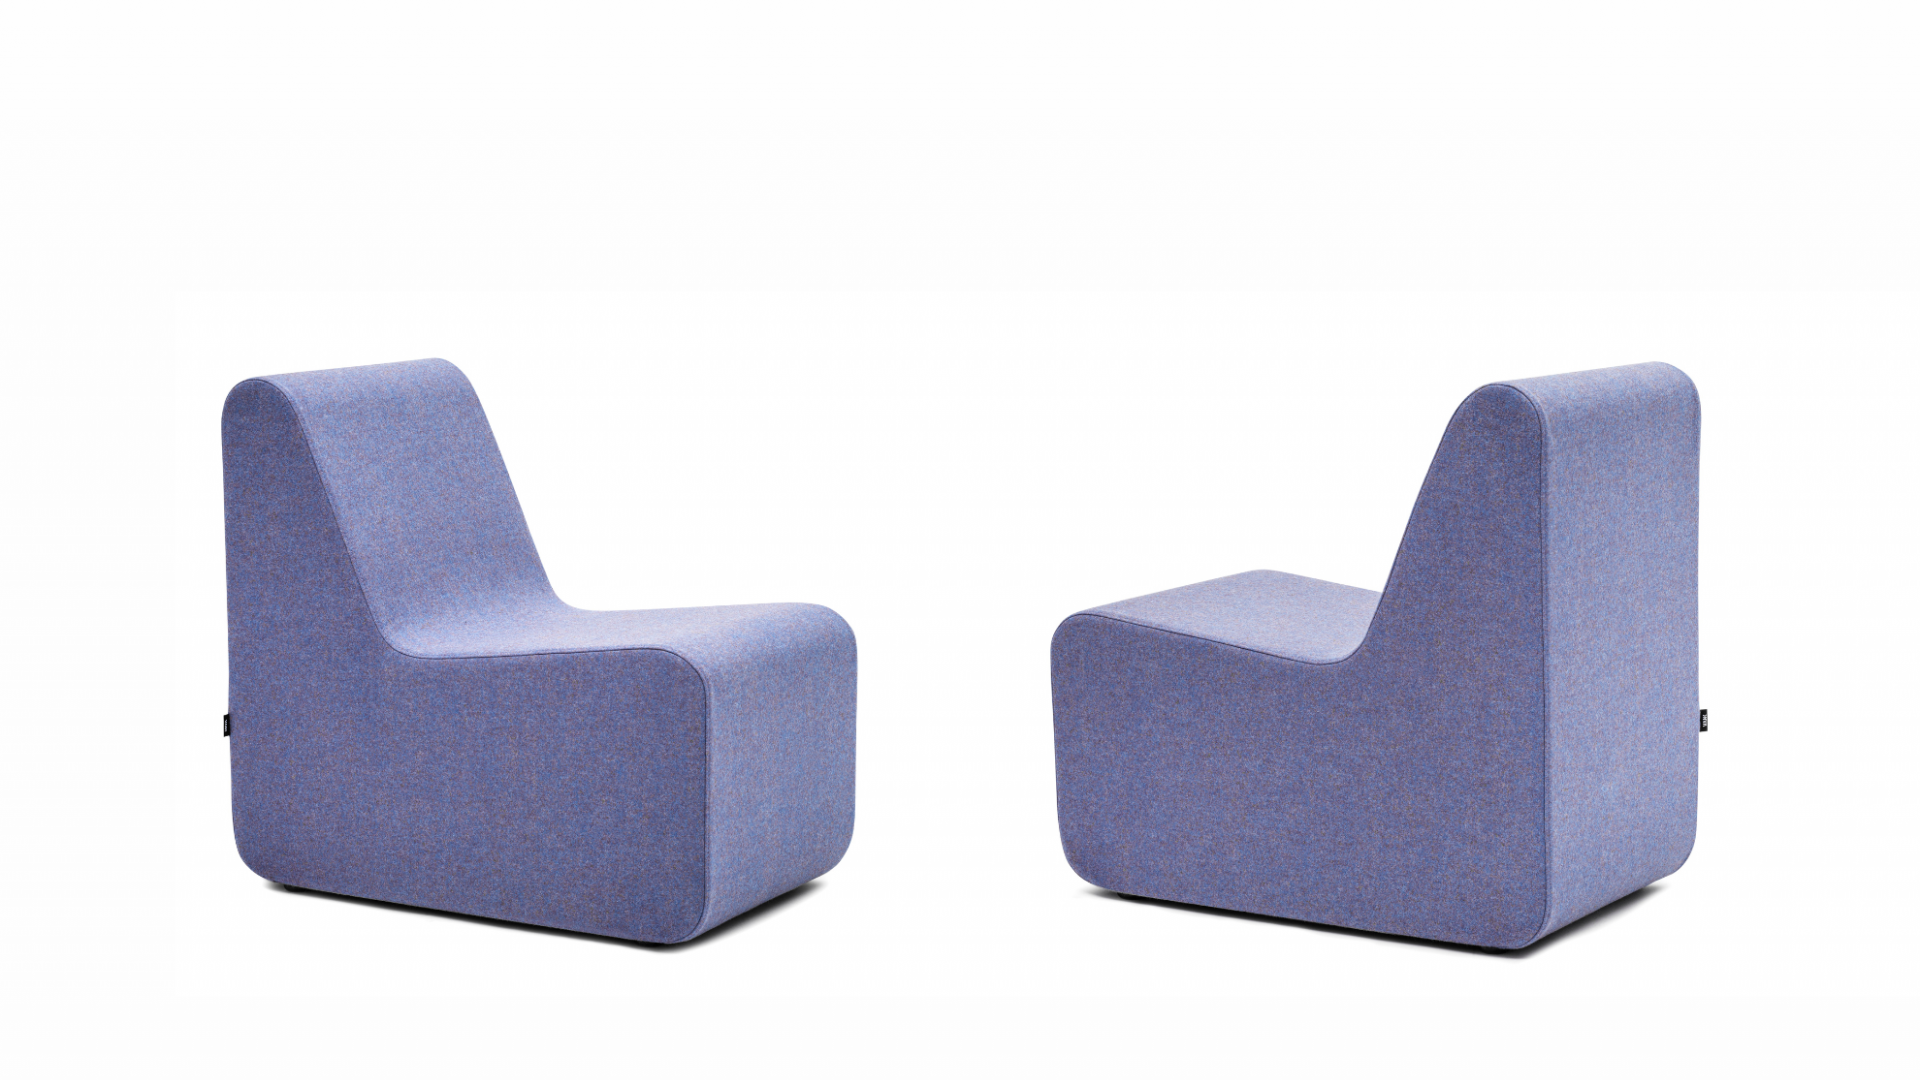 CELOO sound-absorbing chairs